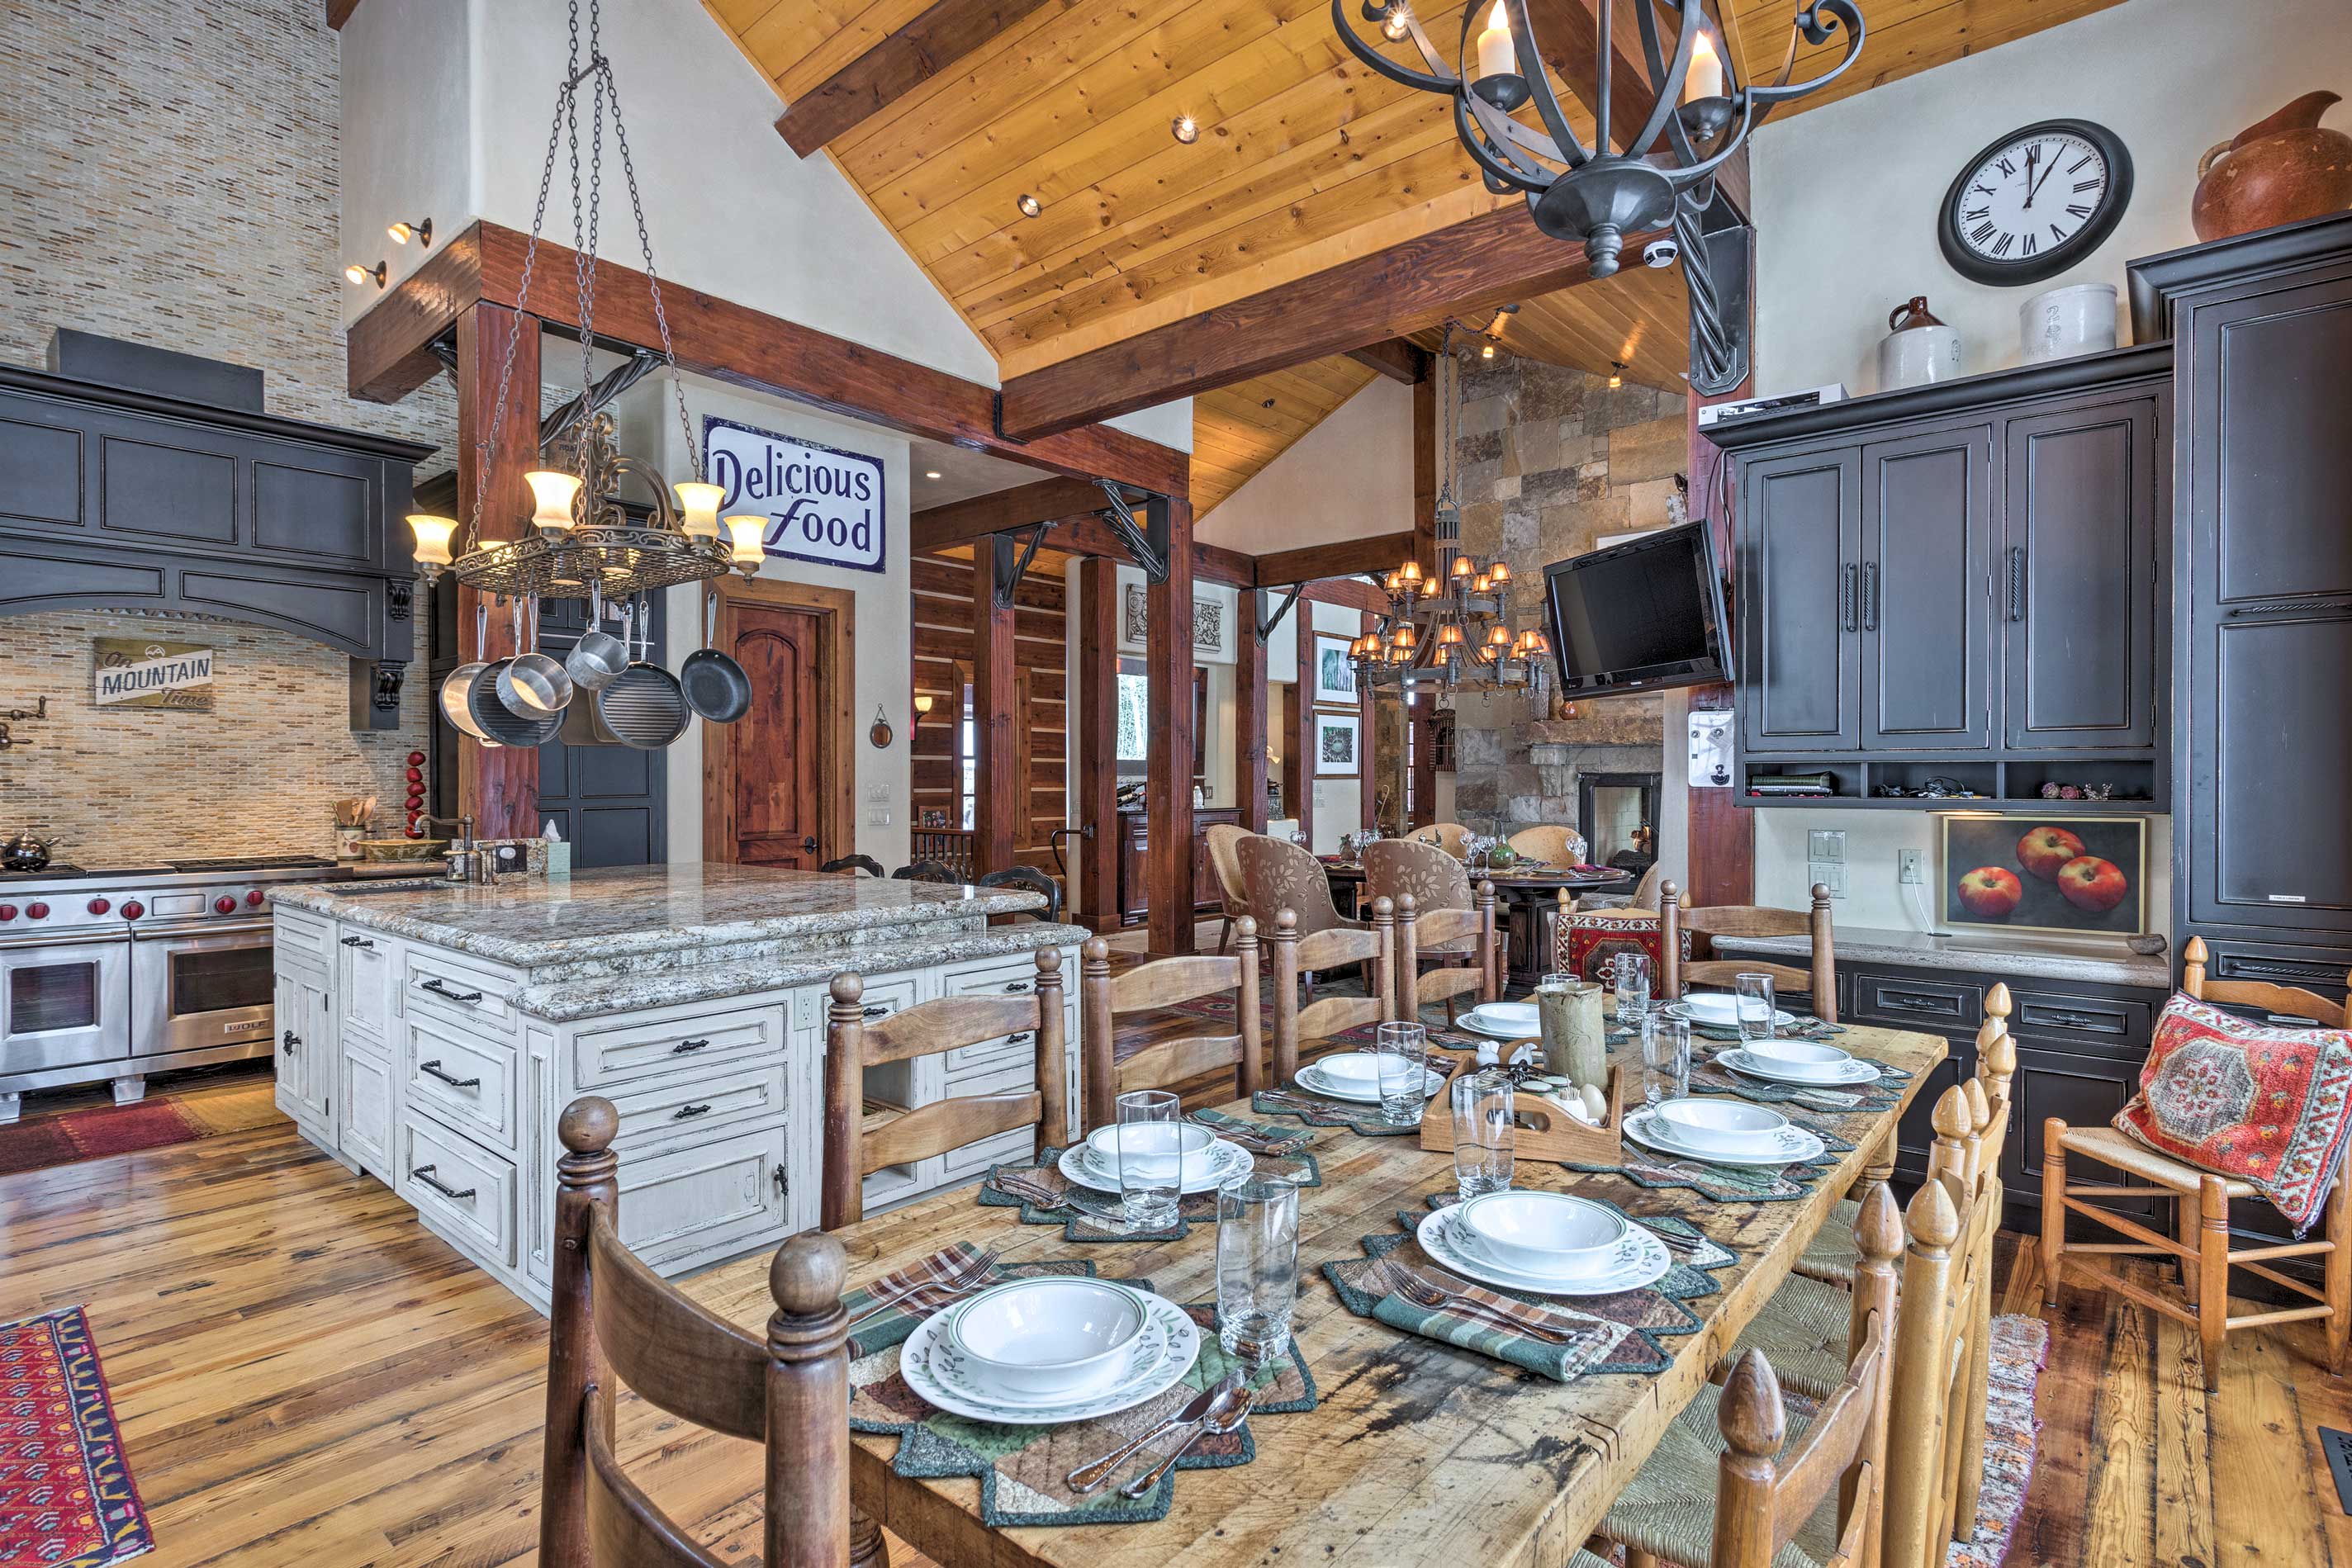 Share a delicious home-cooked meal around the spacious wood dining table.